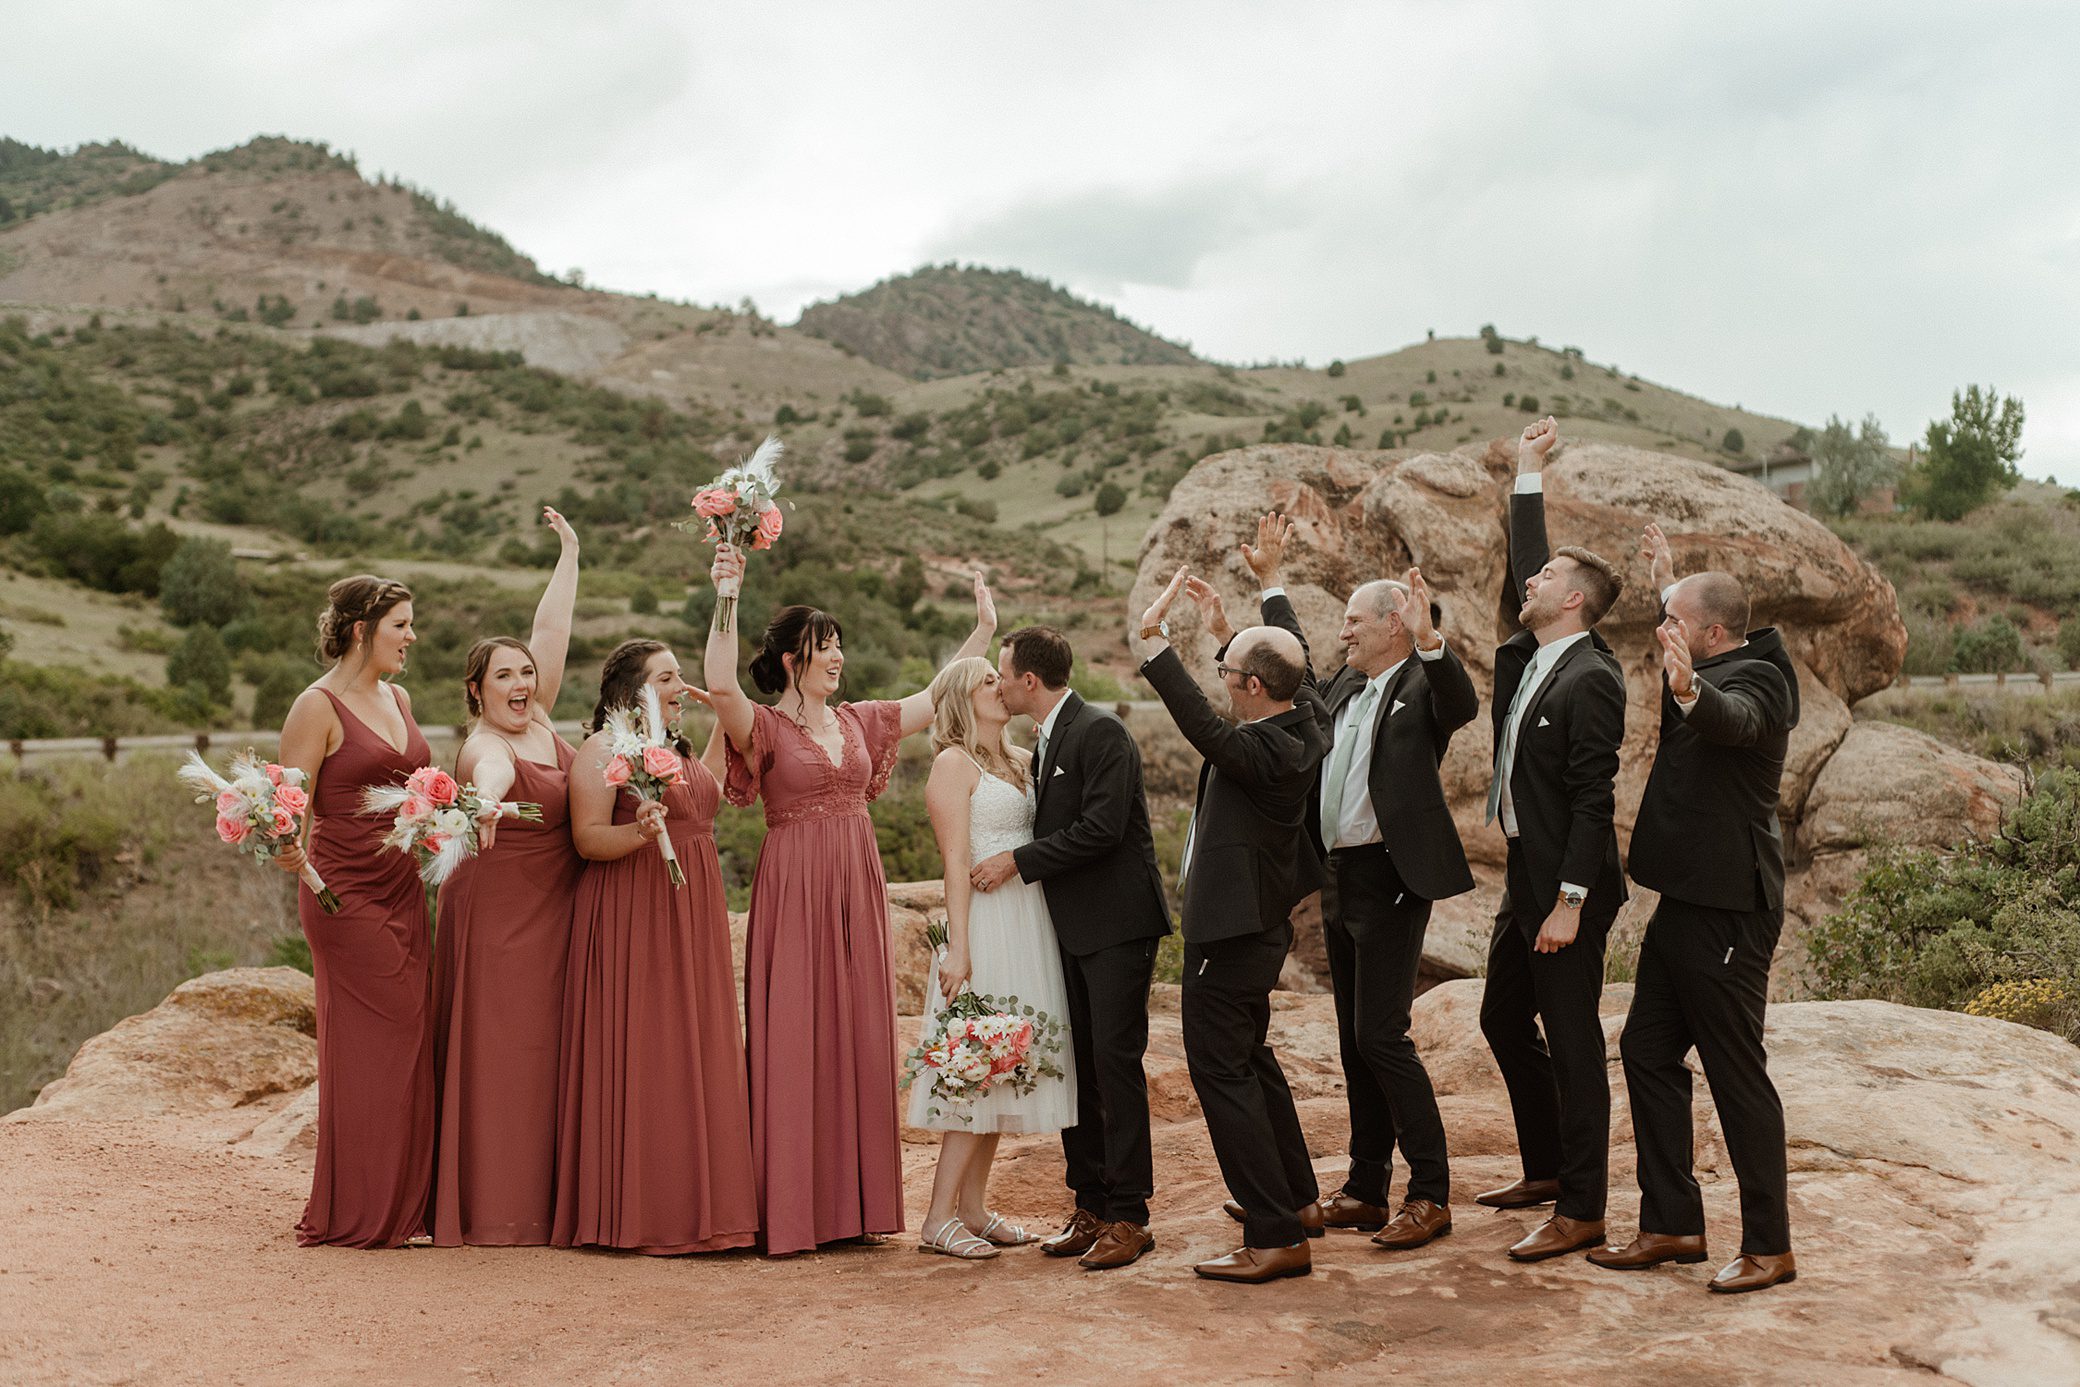 A wedding party celebrates on the red rocks of Willow Ridge Manor wedding venue in Morrison, CO